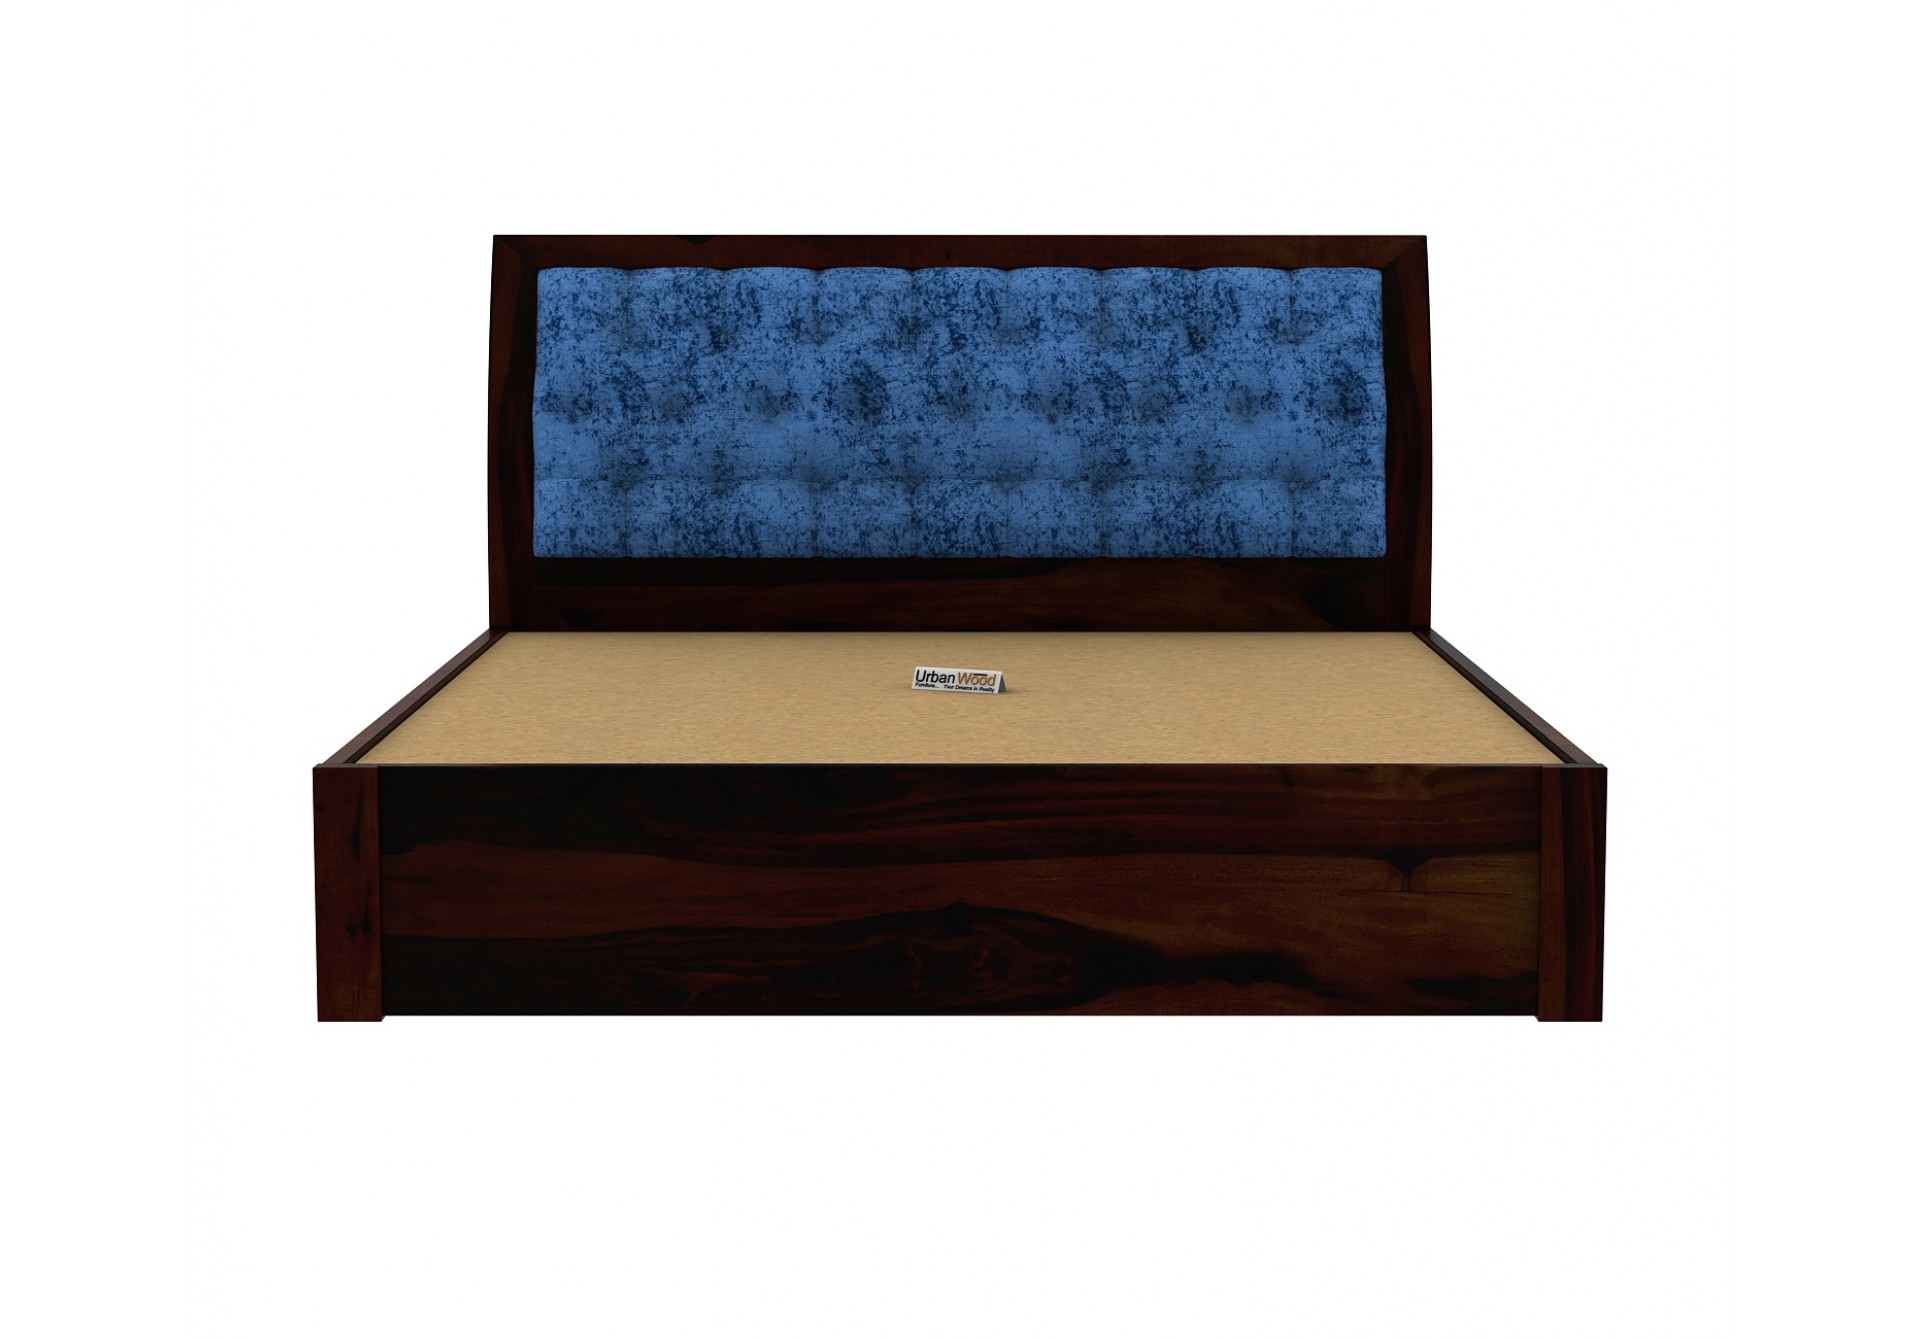 Ross  Wooden Bed With Drawer Storage (King Size, Walnut Finish)